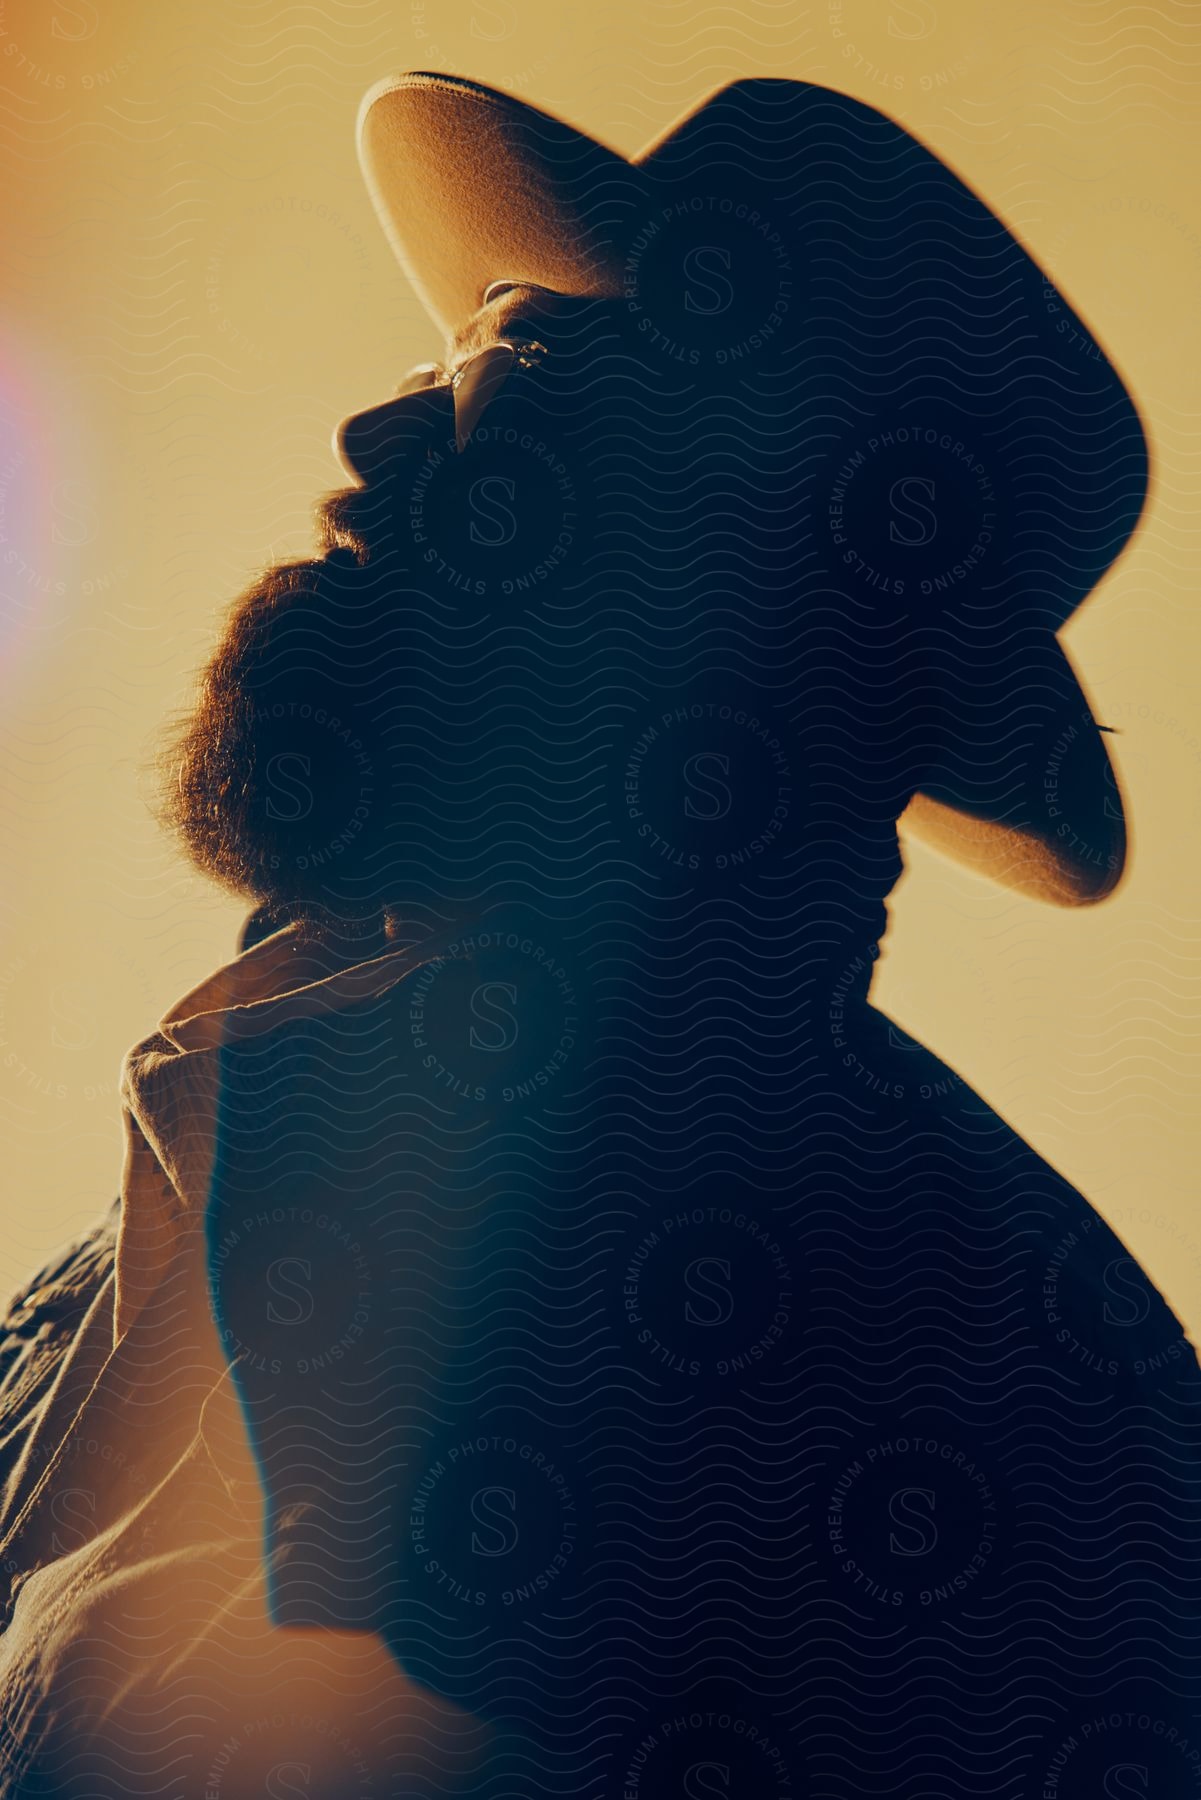 Silhouette of a bearded man wearing a hat at evening looking up